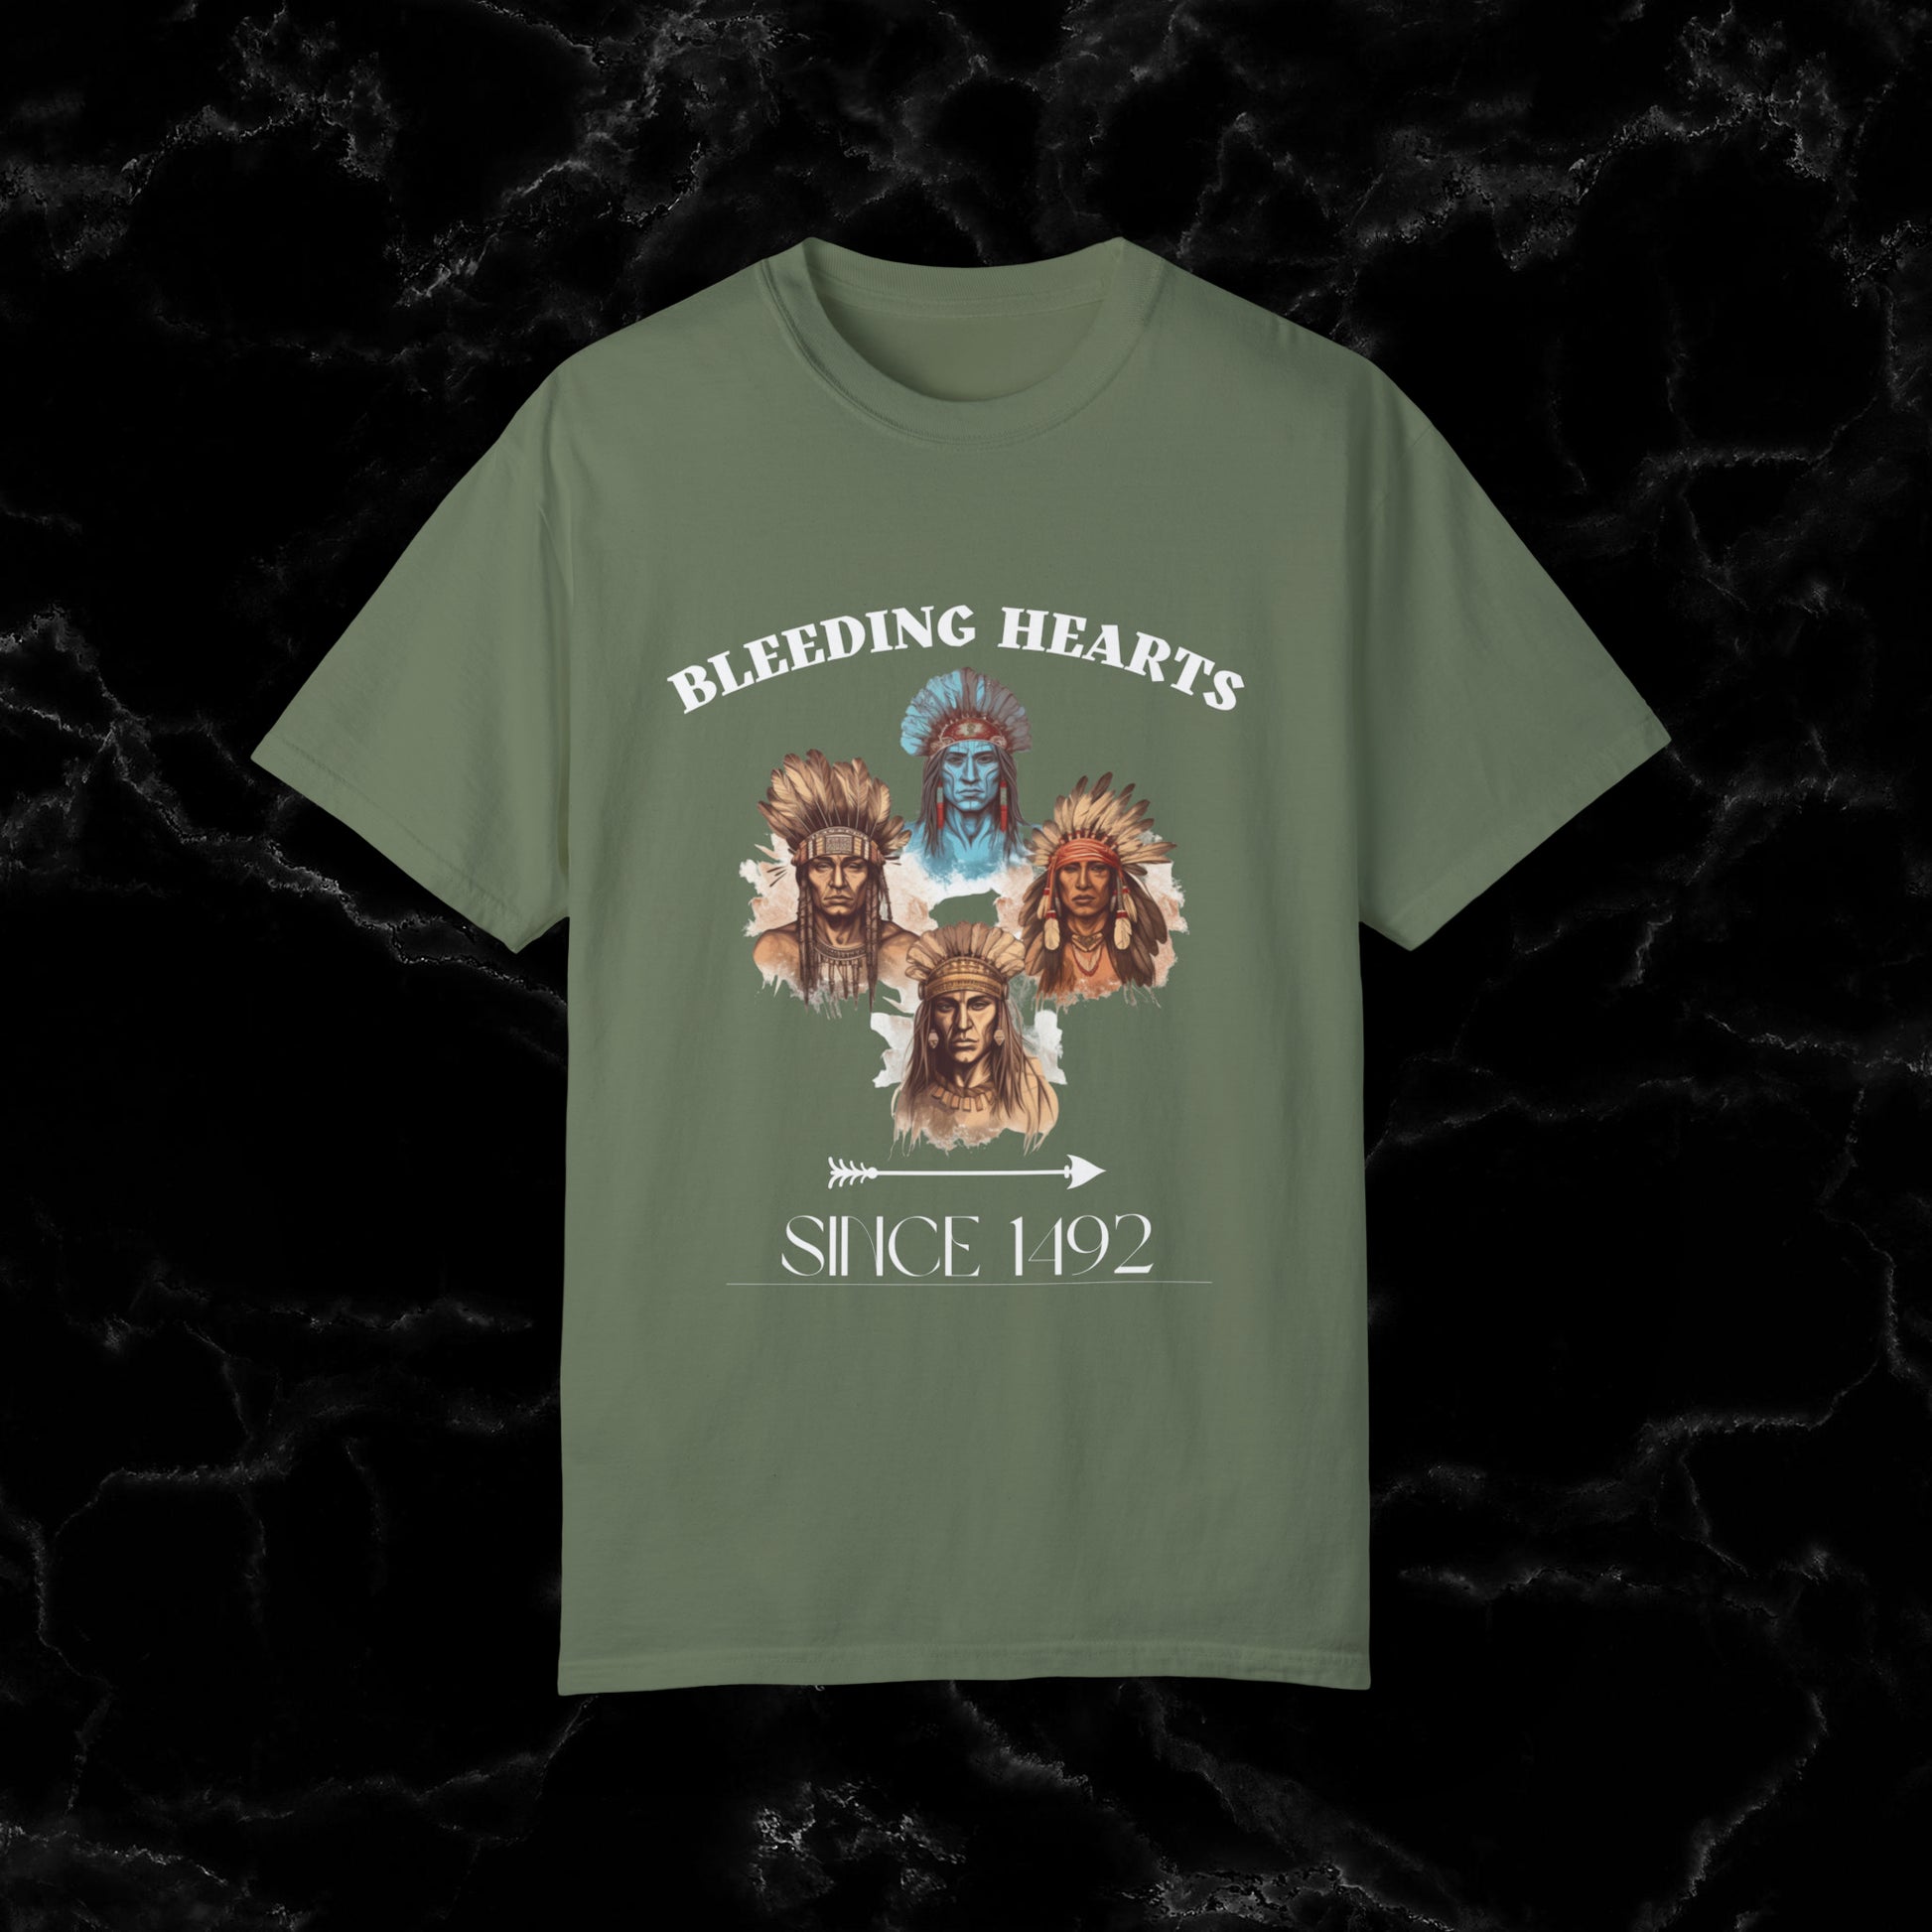 Native American Comfort Colors Shirt - Authentic Tribal Design, Nature-Inspired Apparel, 'Bleeding Hearts since 1492 T-Shirt Moss S 